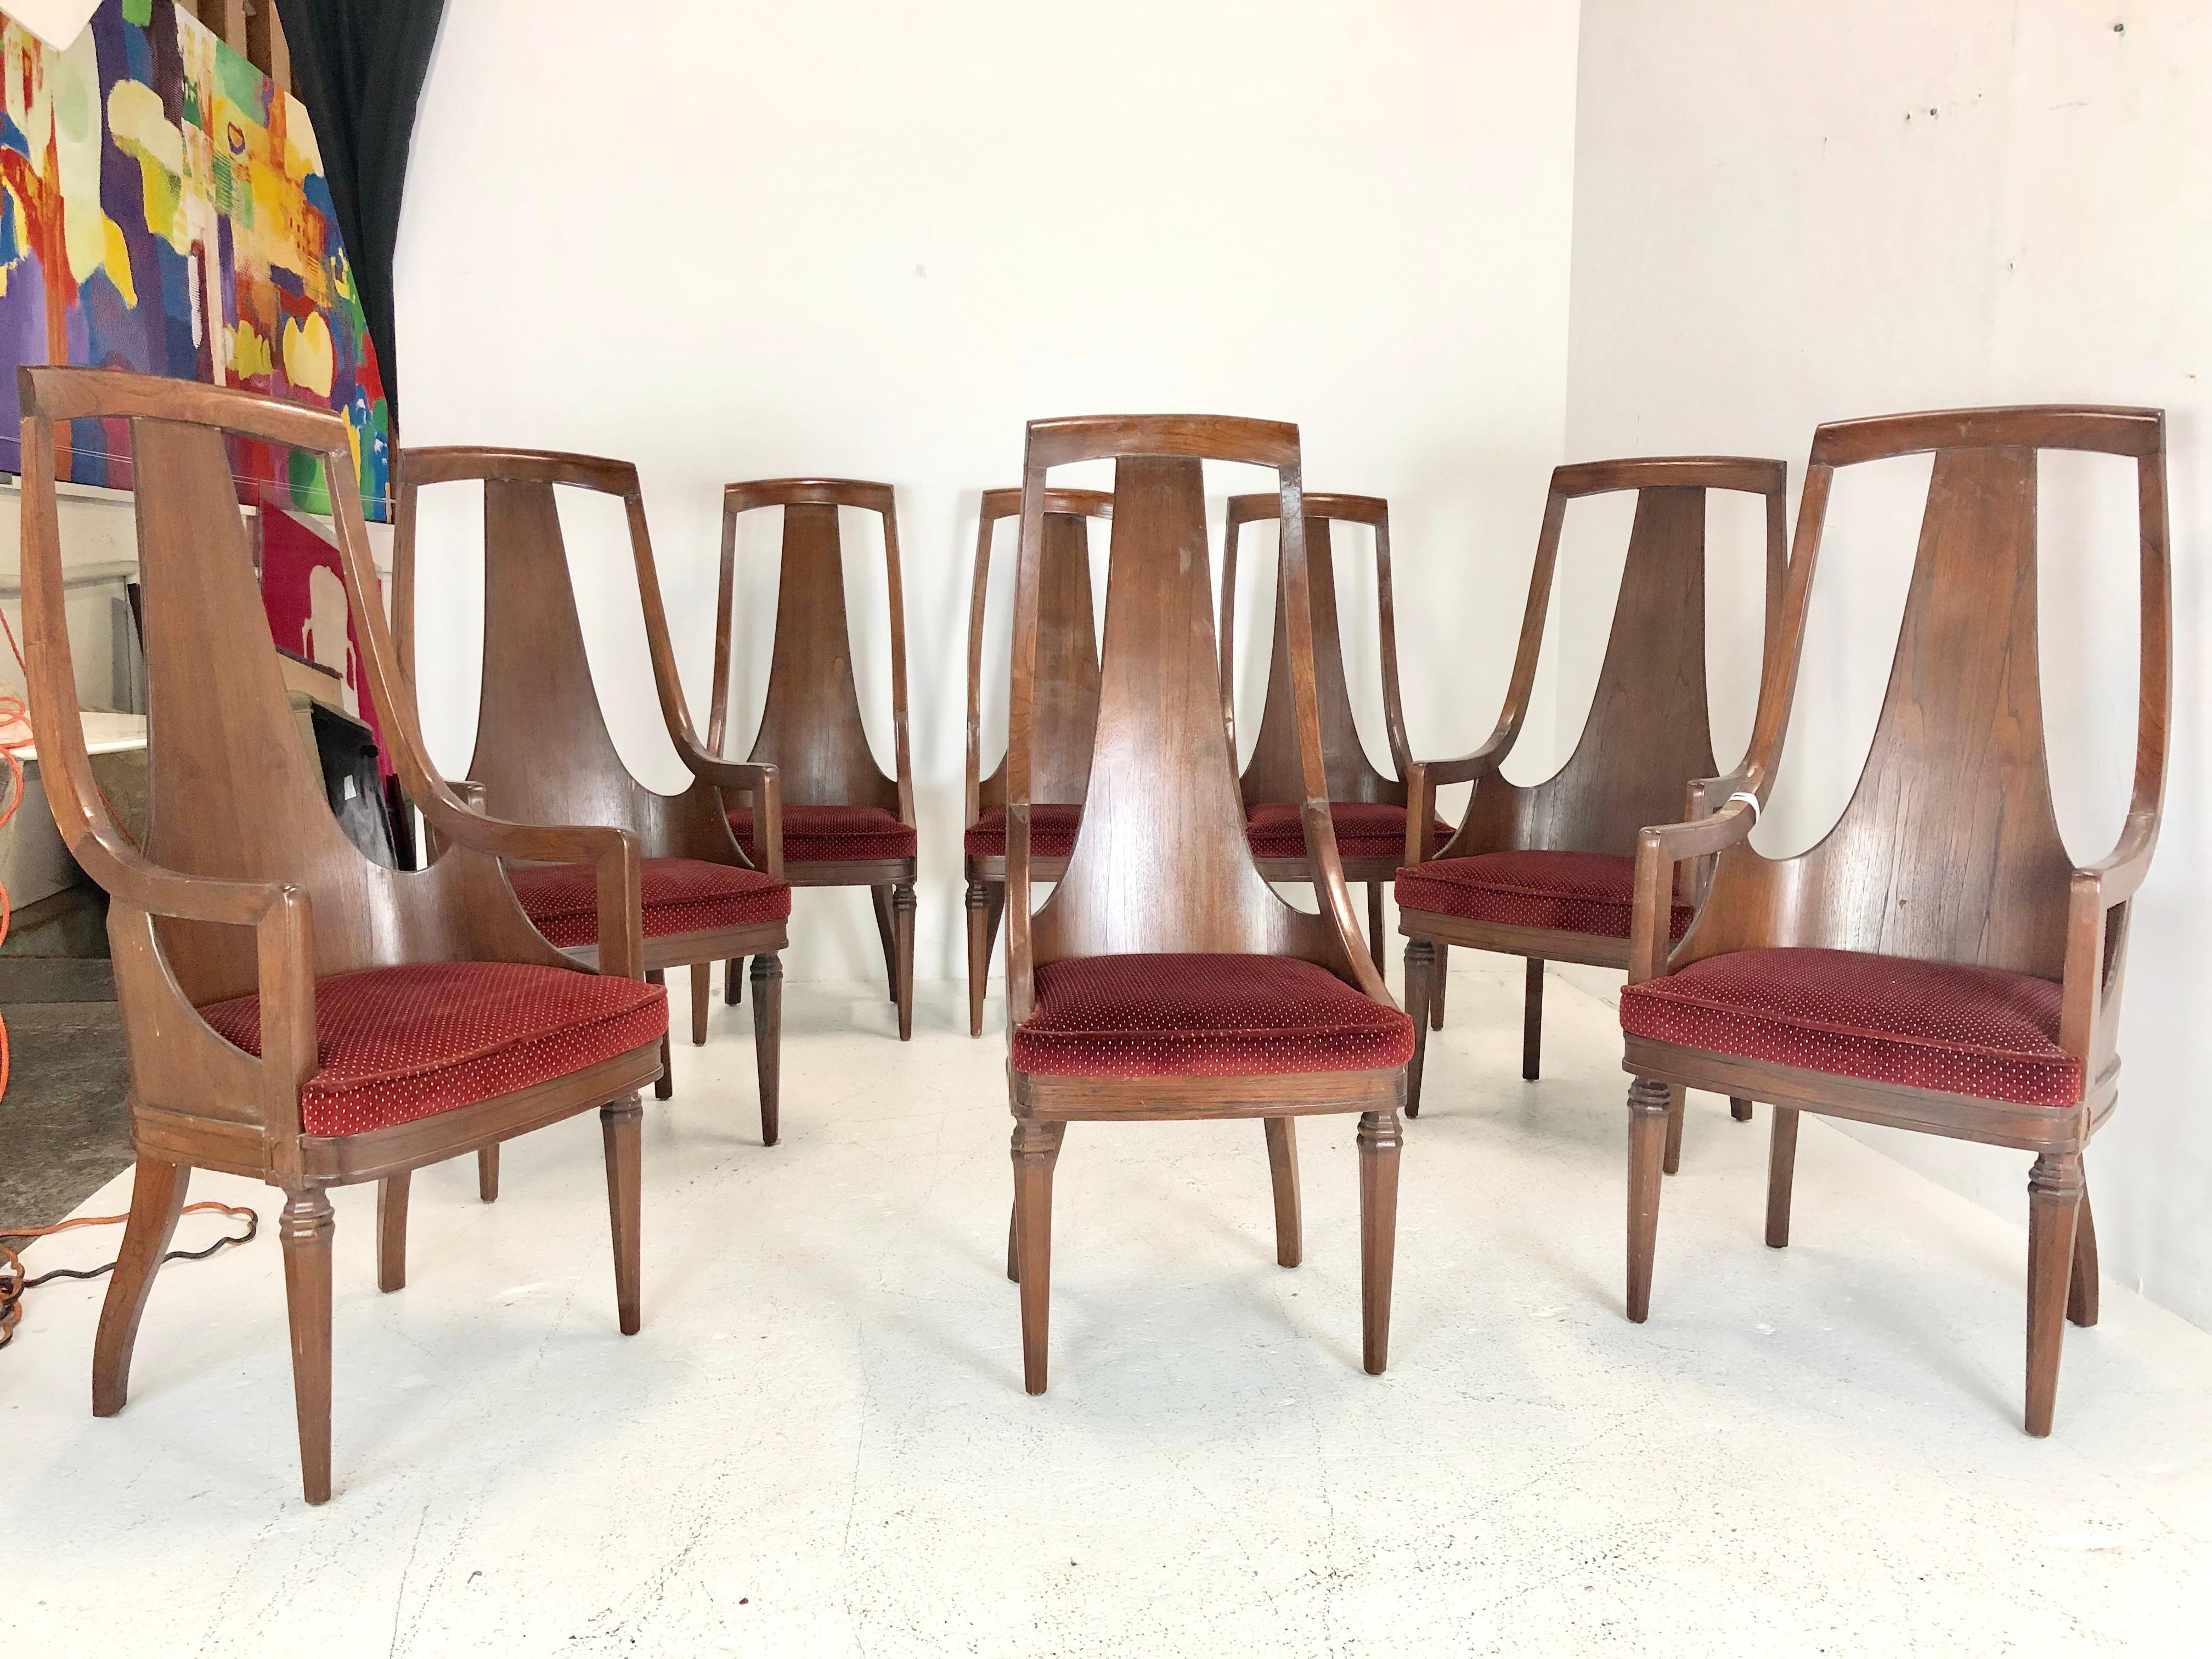 Set of 4 tall back walnut dining side chairs. These chairs have been re-glued and need refinishing.

Dimensions:
19